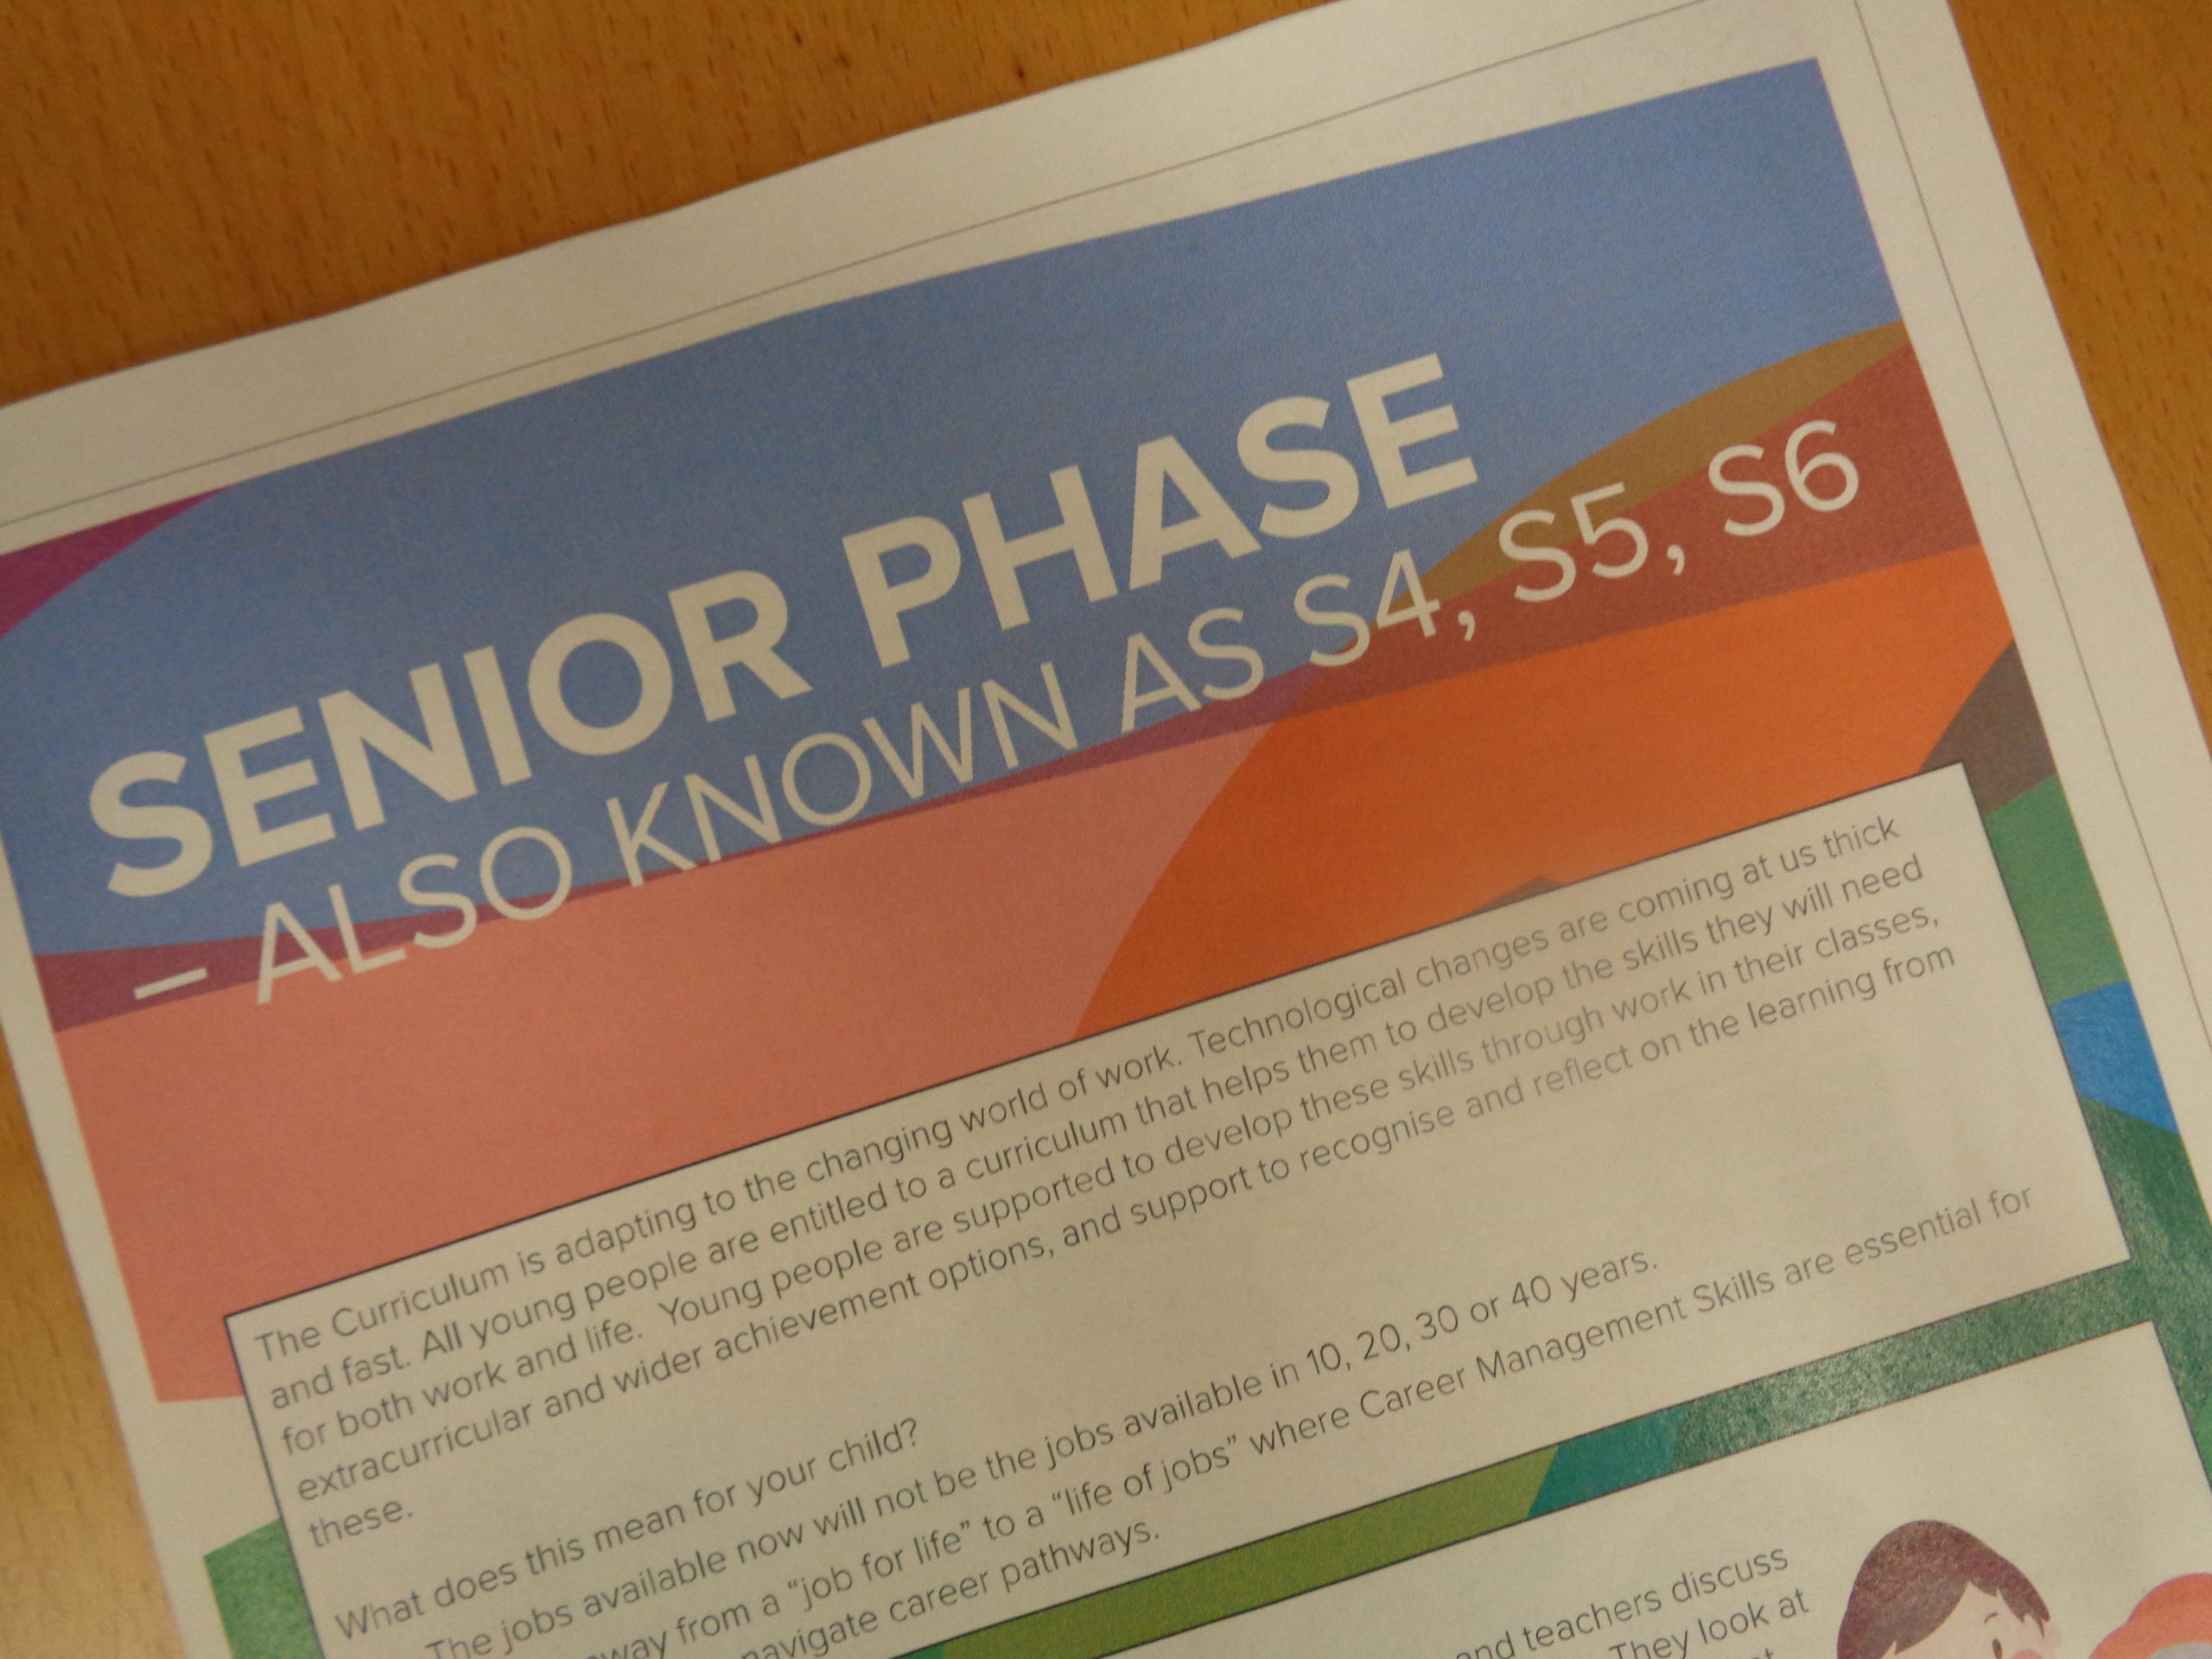 What is the Senior Phase of school?